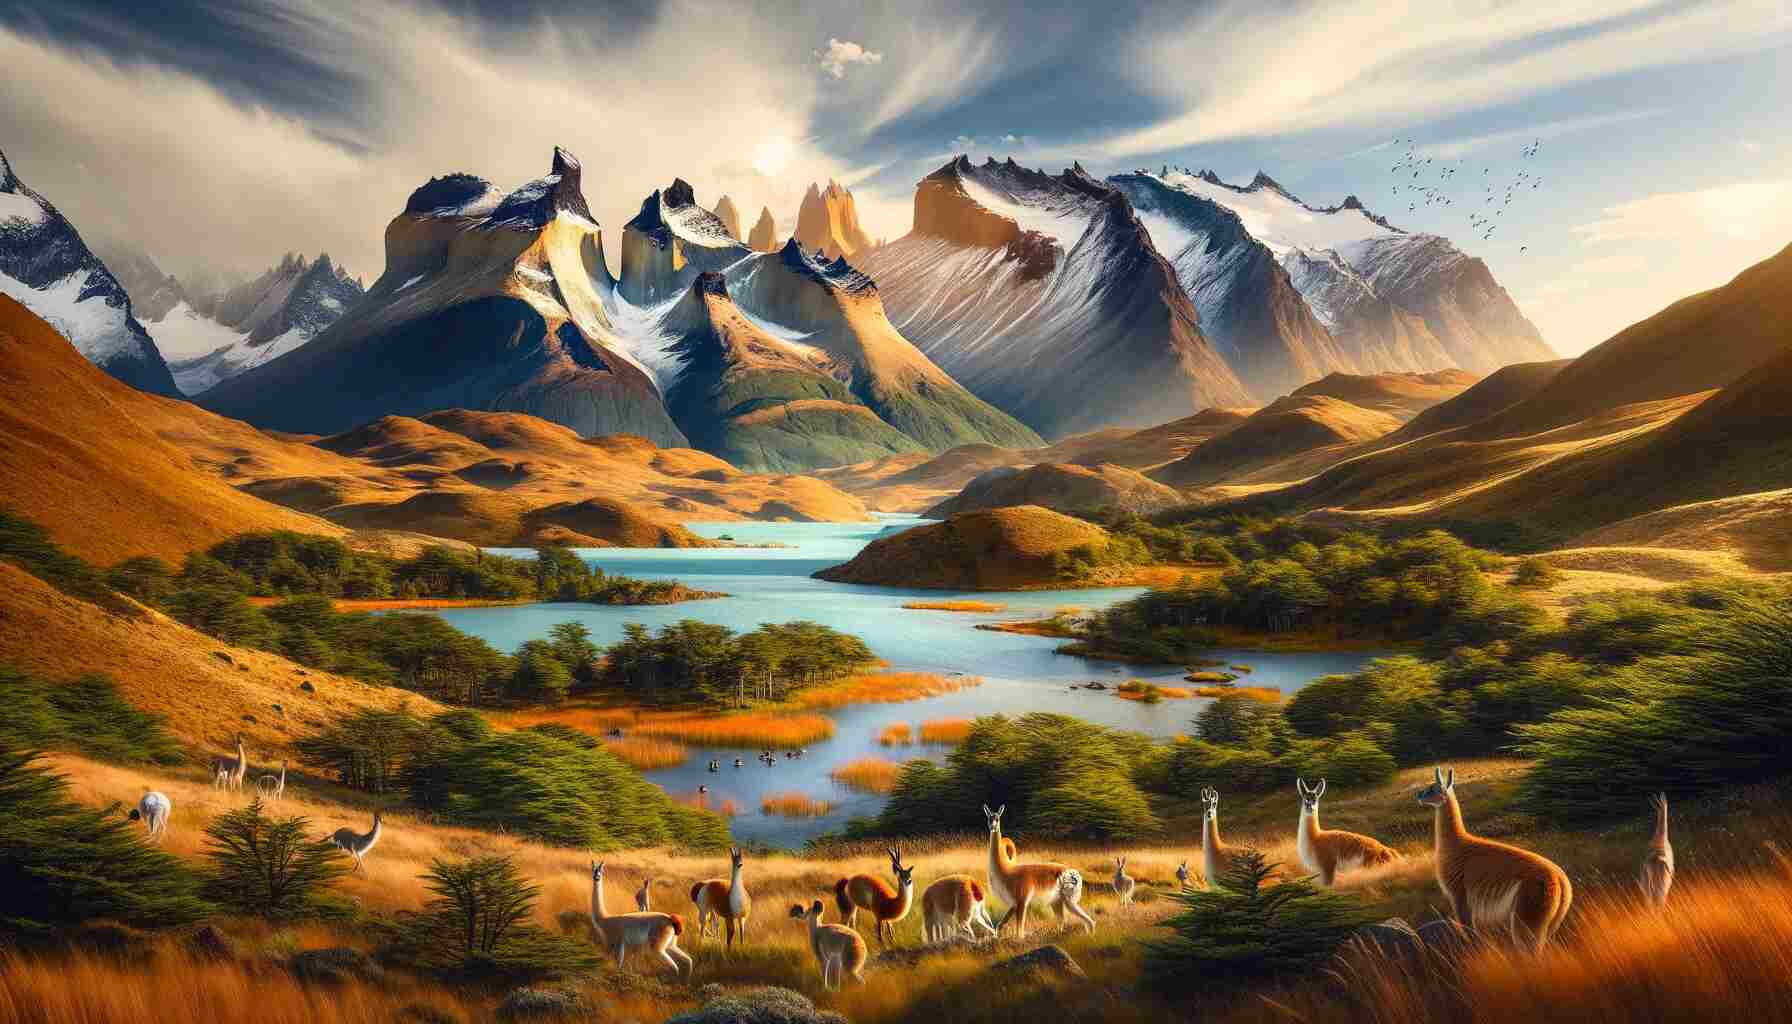 This image depicting the varied landscapes and wildlife of Torres del Paine National Park in Chile, focusing on the iconic peaks and diverse hiking options, is now complete.